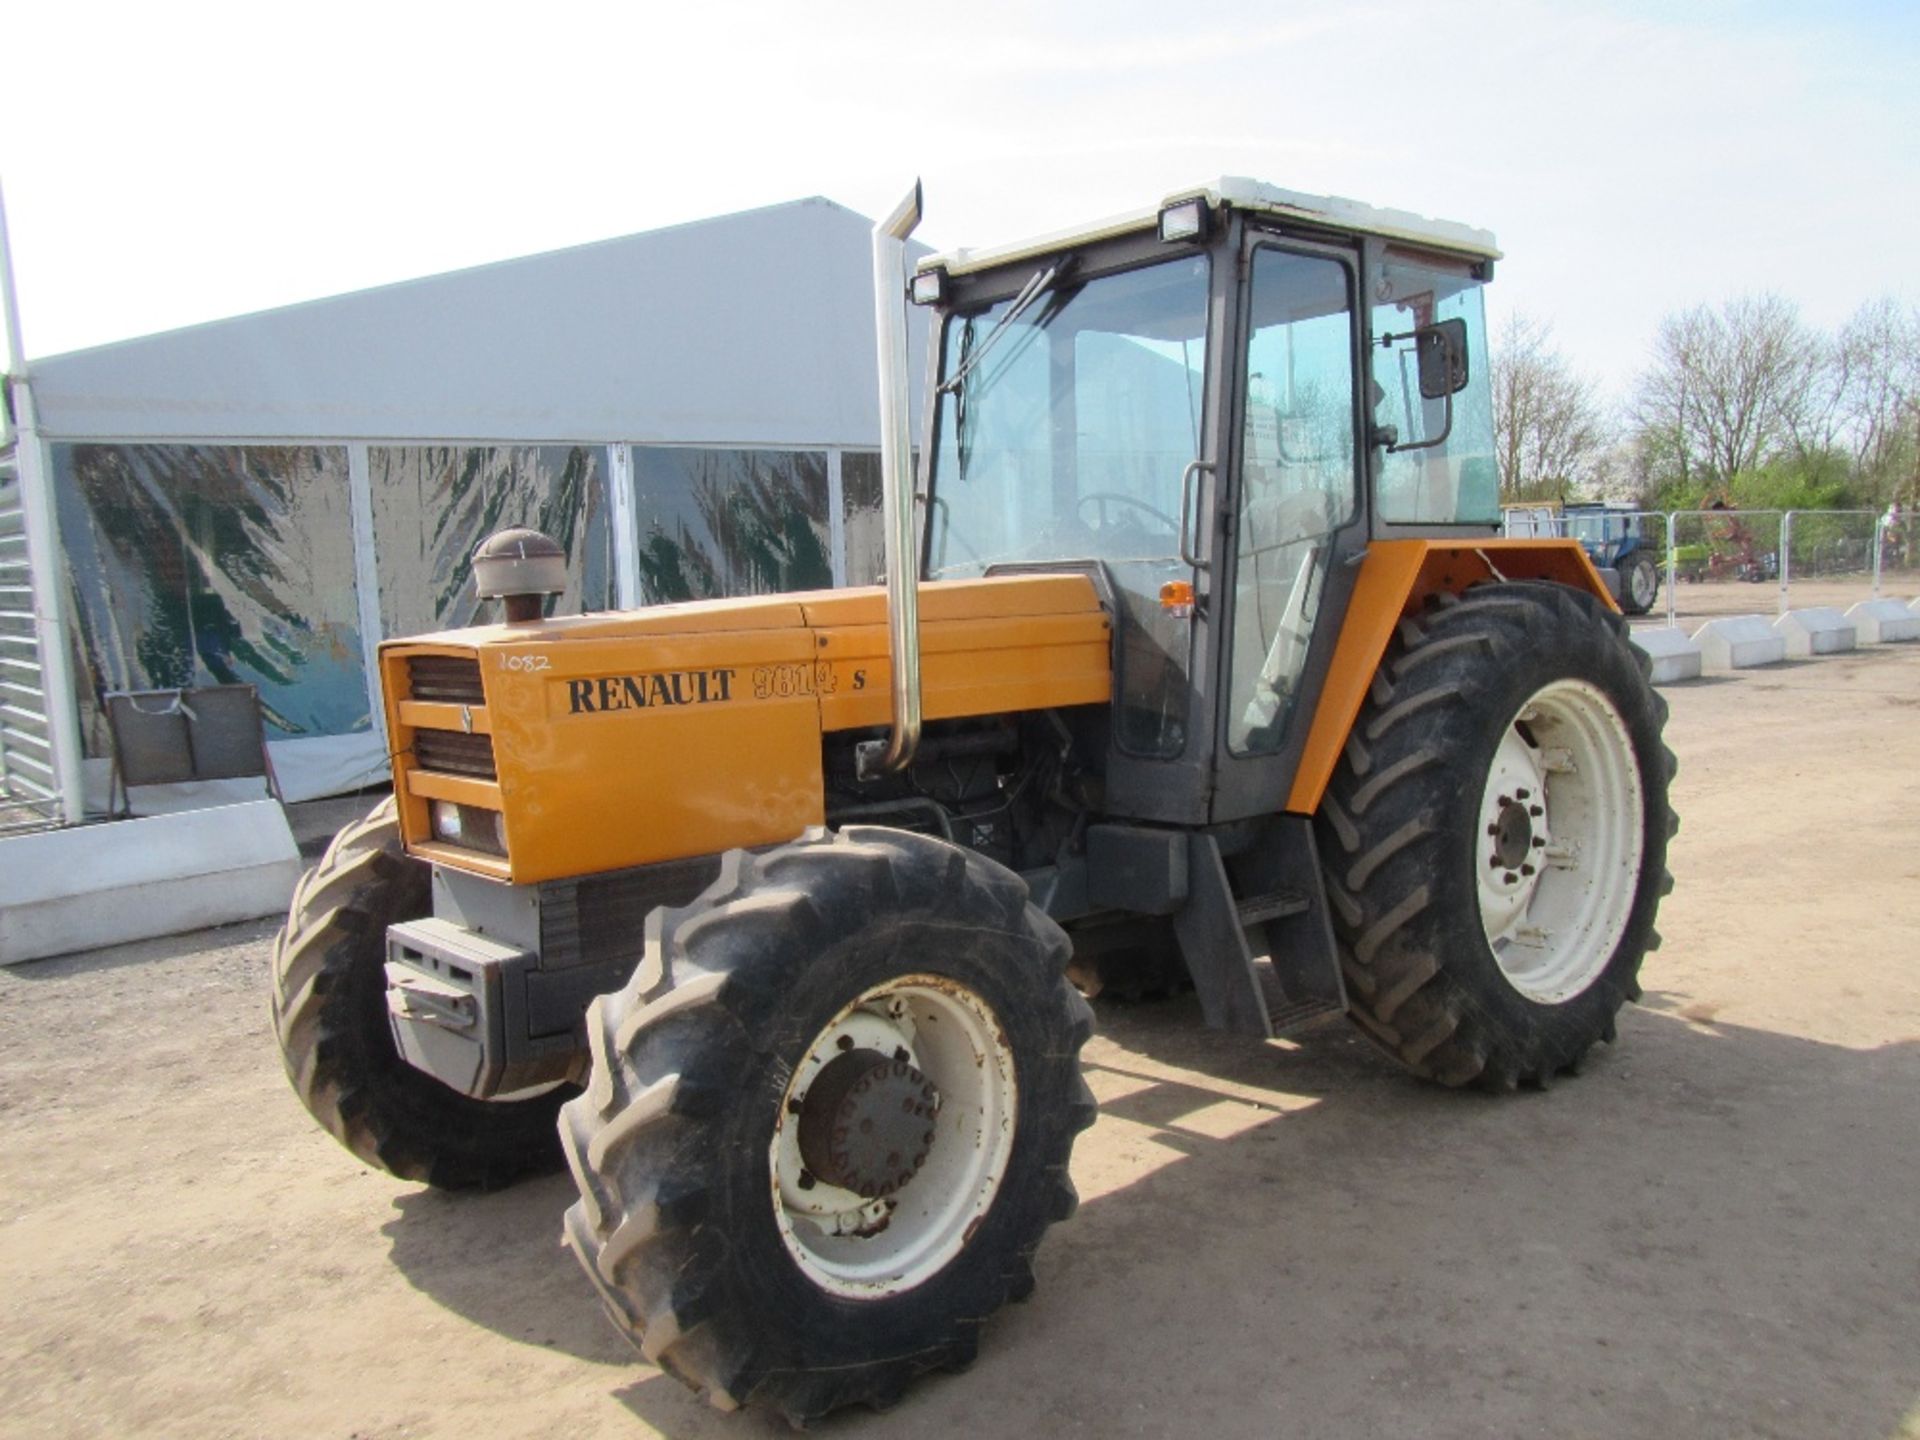 1983 Renault 981-4 Tractor. Reg Docs will be supplied. Reg. No. MBX 206Y Chassis No. 4483791